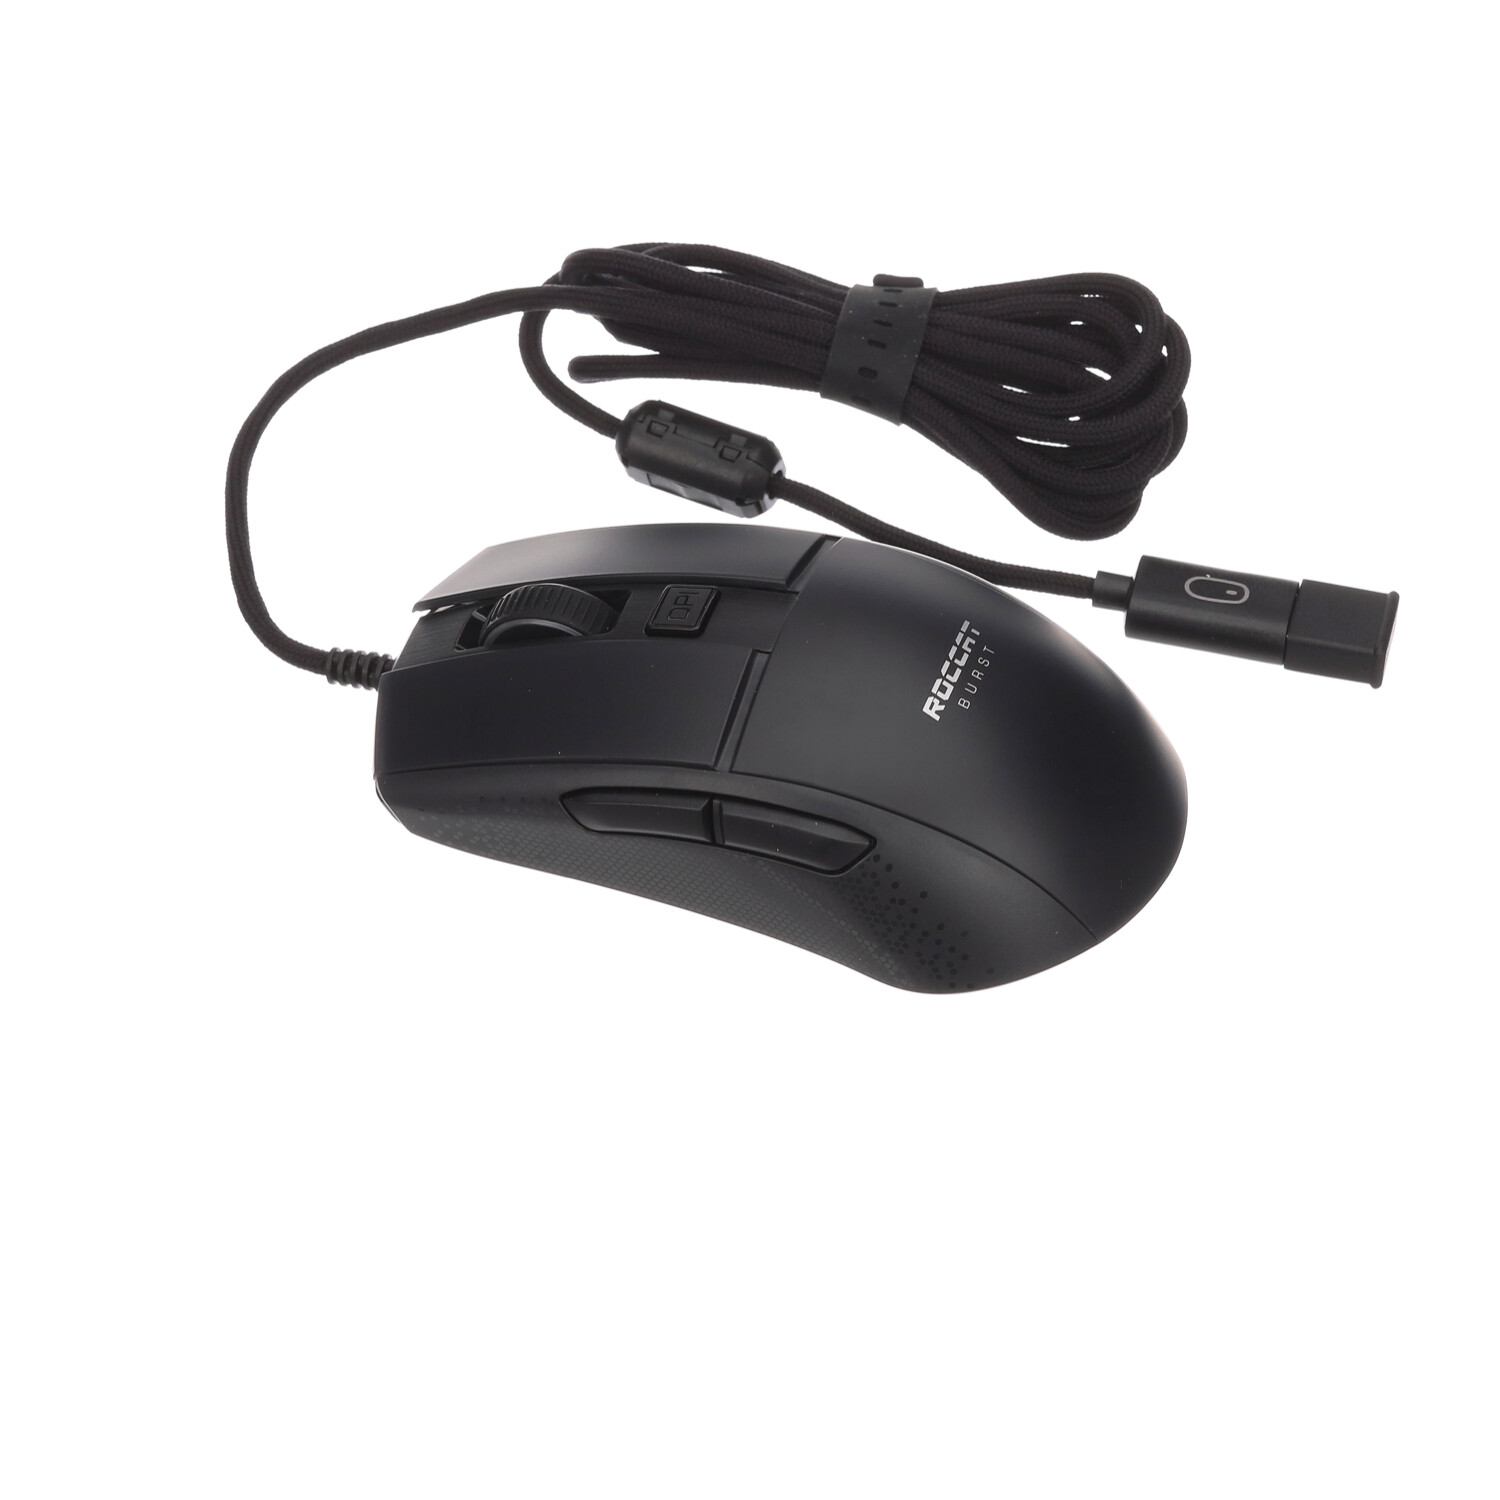 Access the Roccat Burst Pro Air Gaming Mouse at Only 49.99